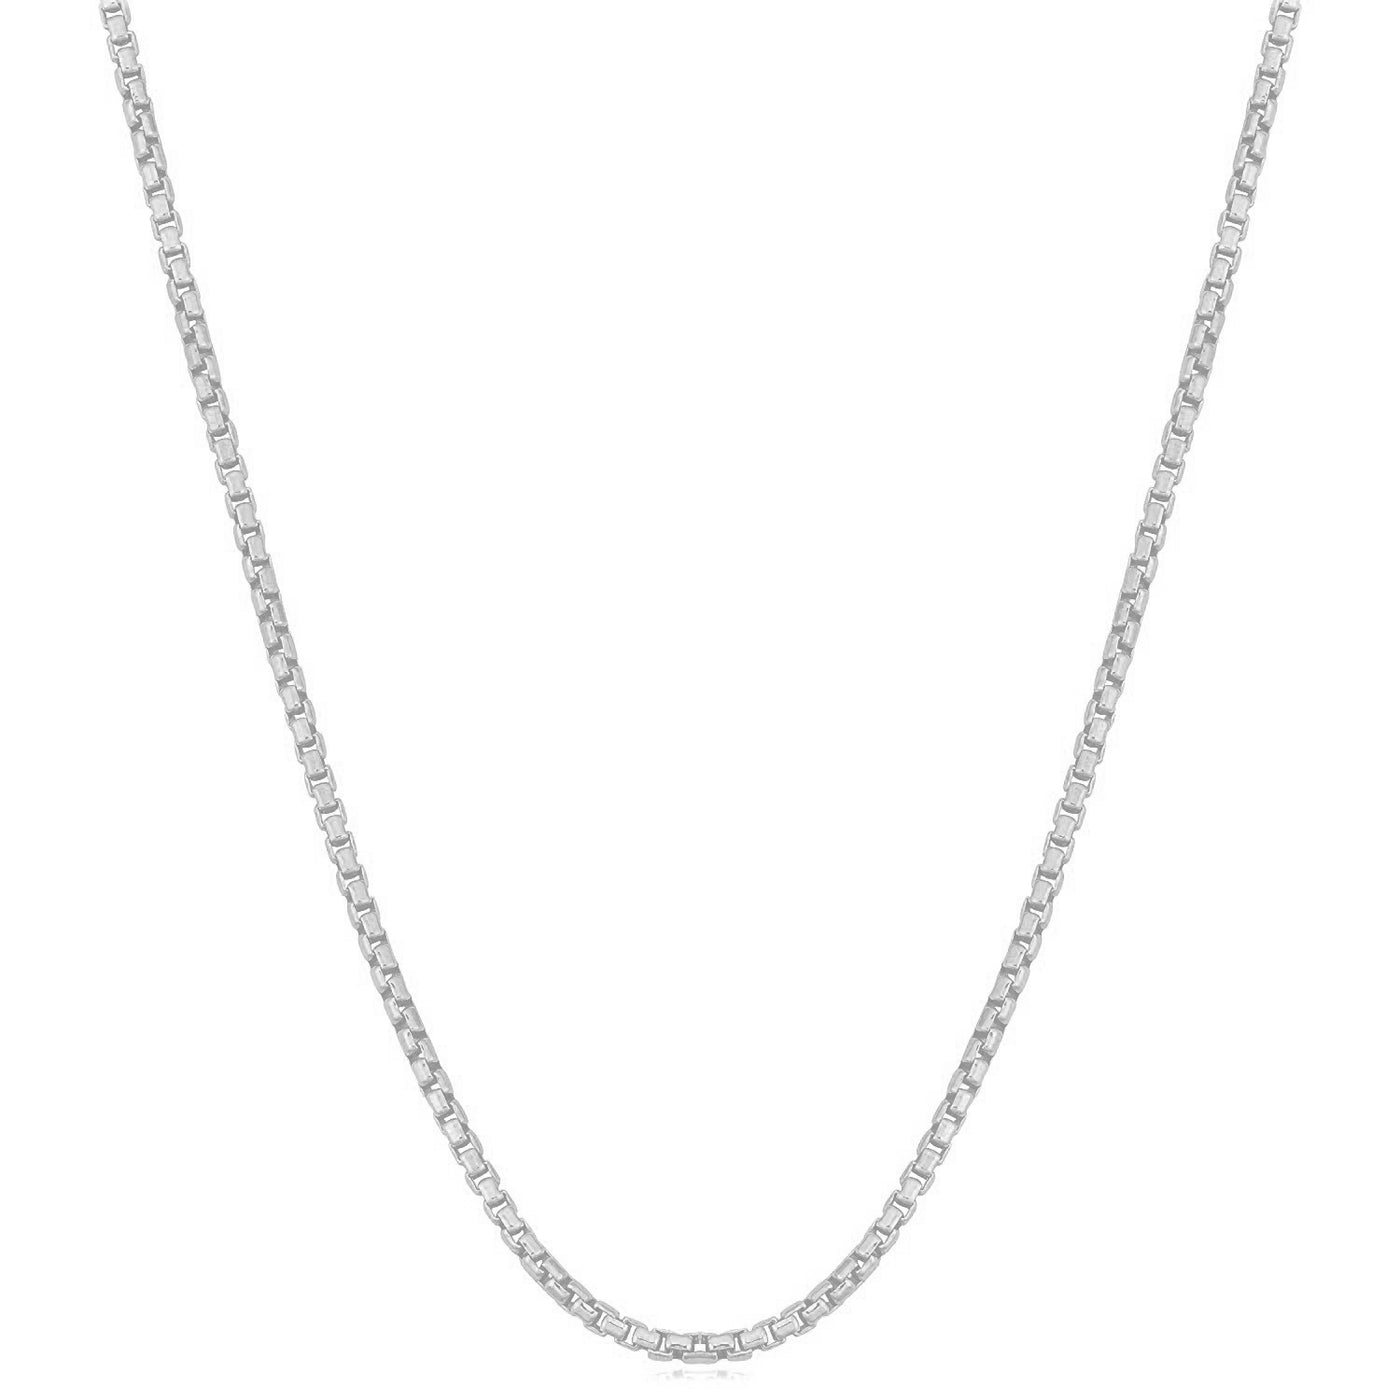 Sterling Silver Round Box Chain Necklace